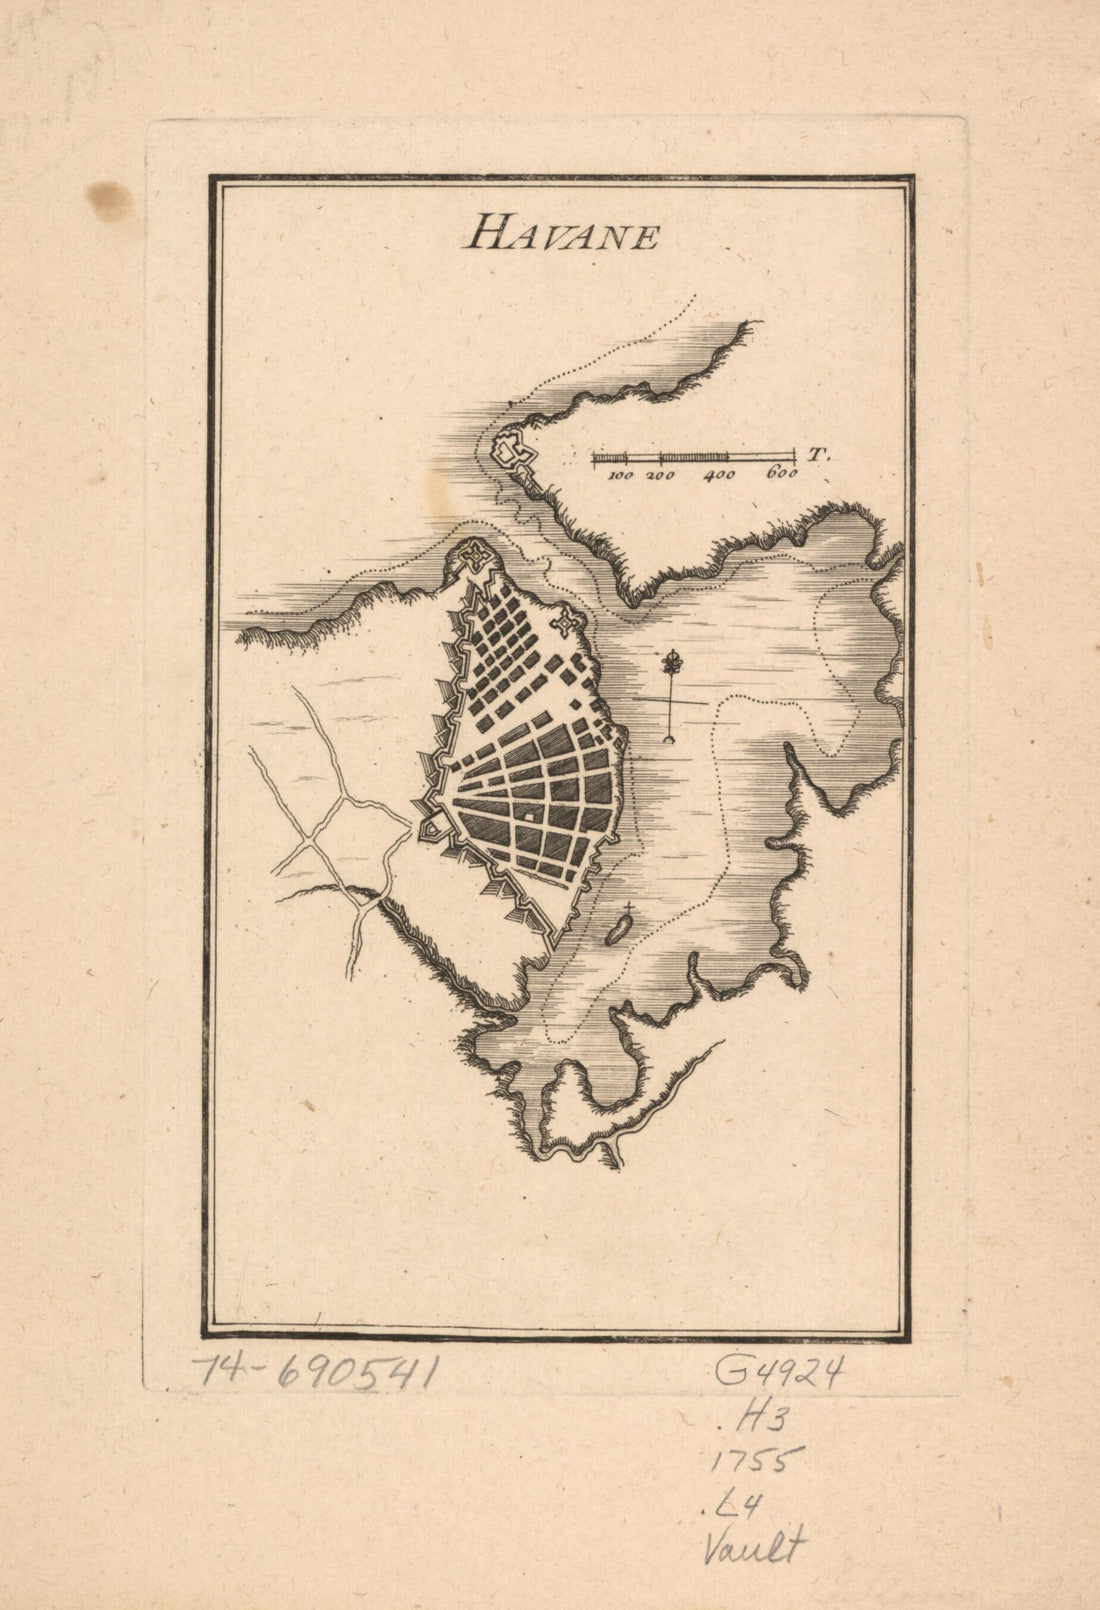 This old map of Havane from 1755 was created by  Louis in 1755